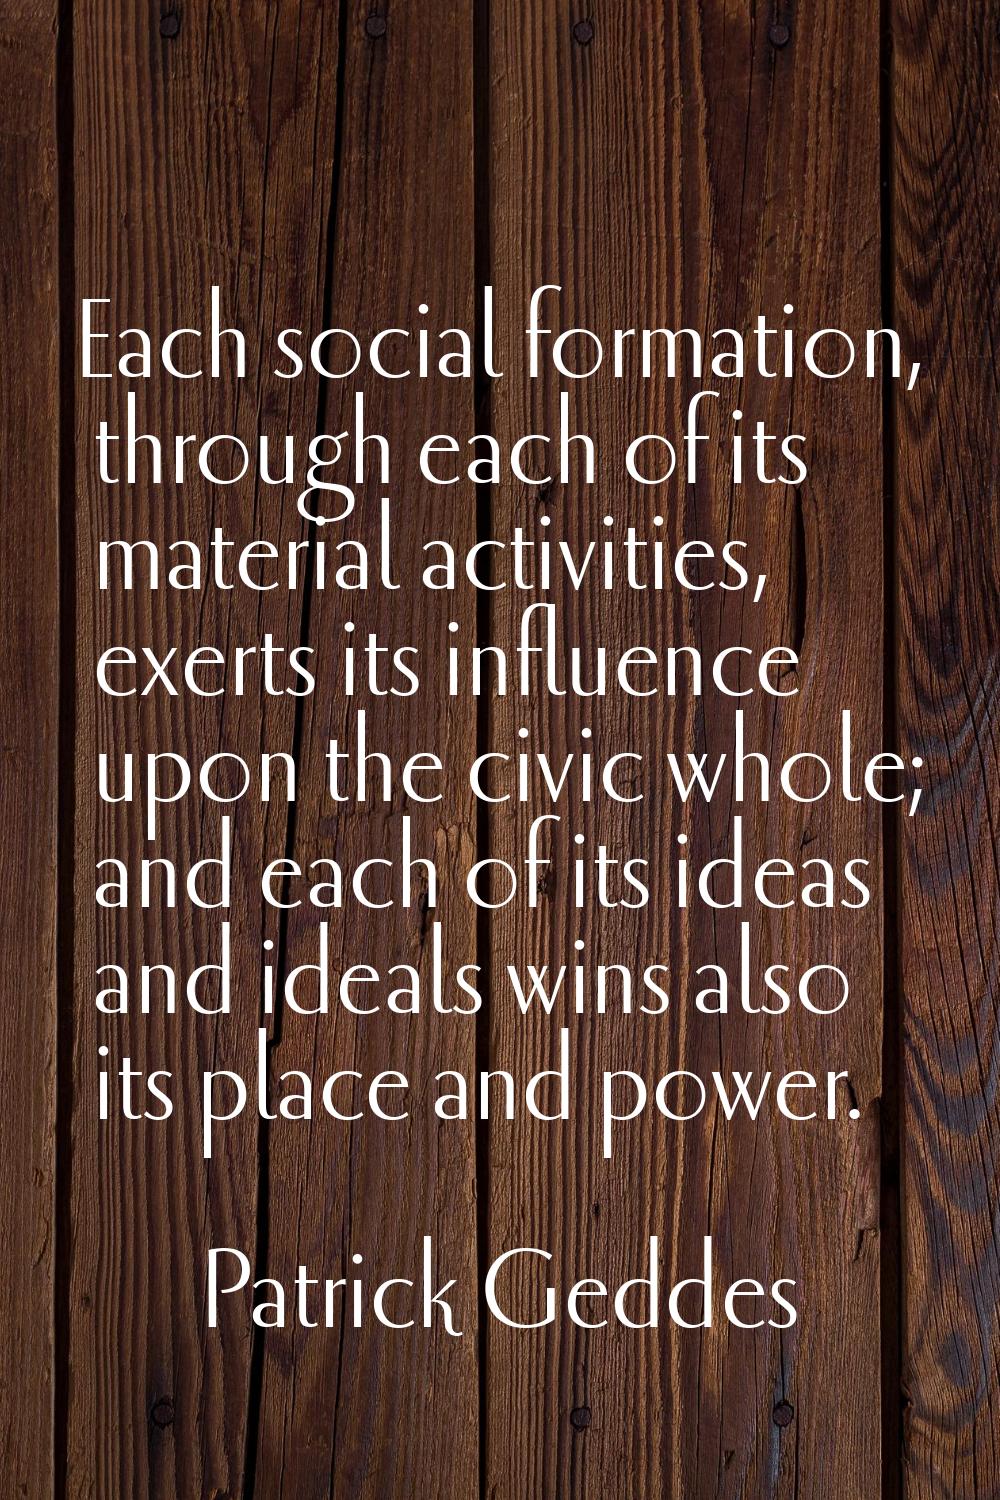 Each social formation, through each of its material activities, exerts its influence upon the civic